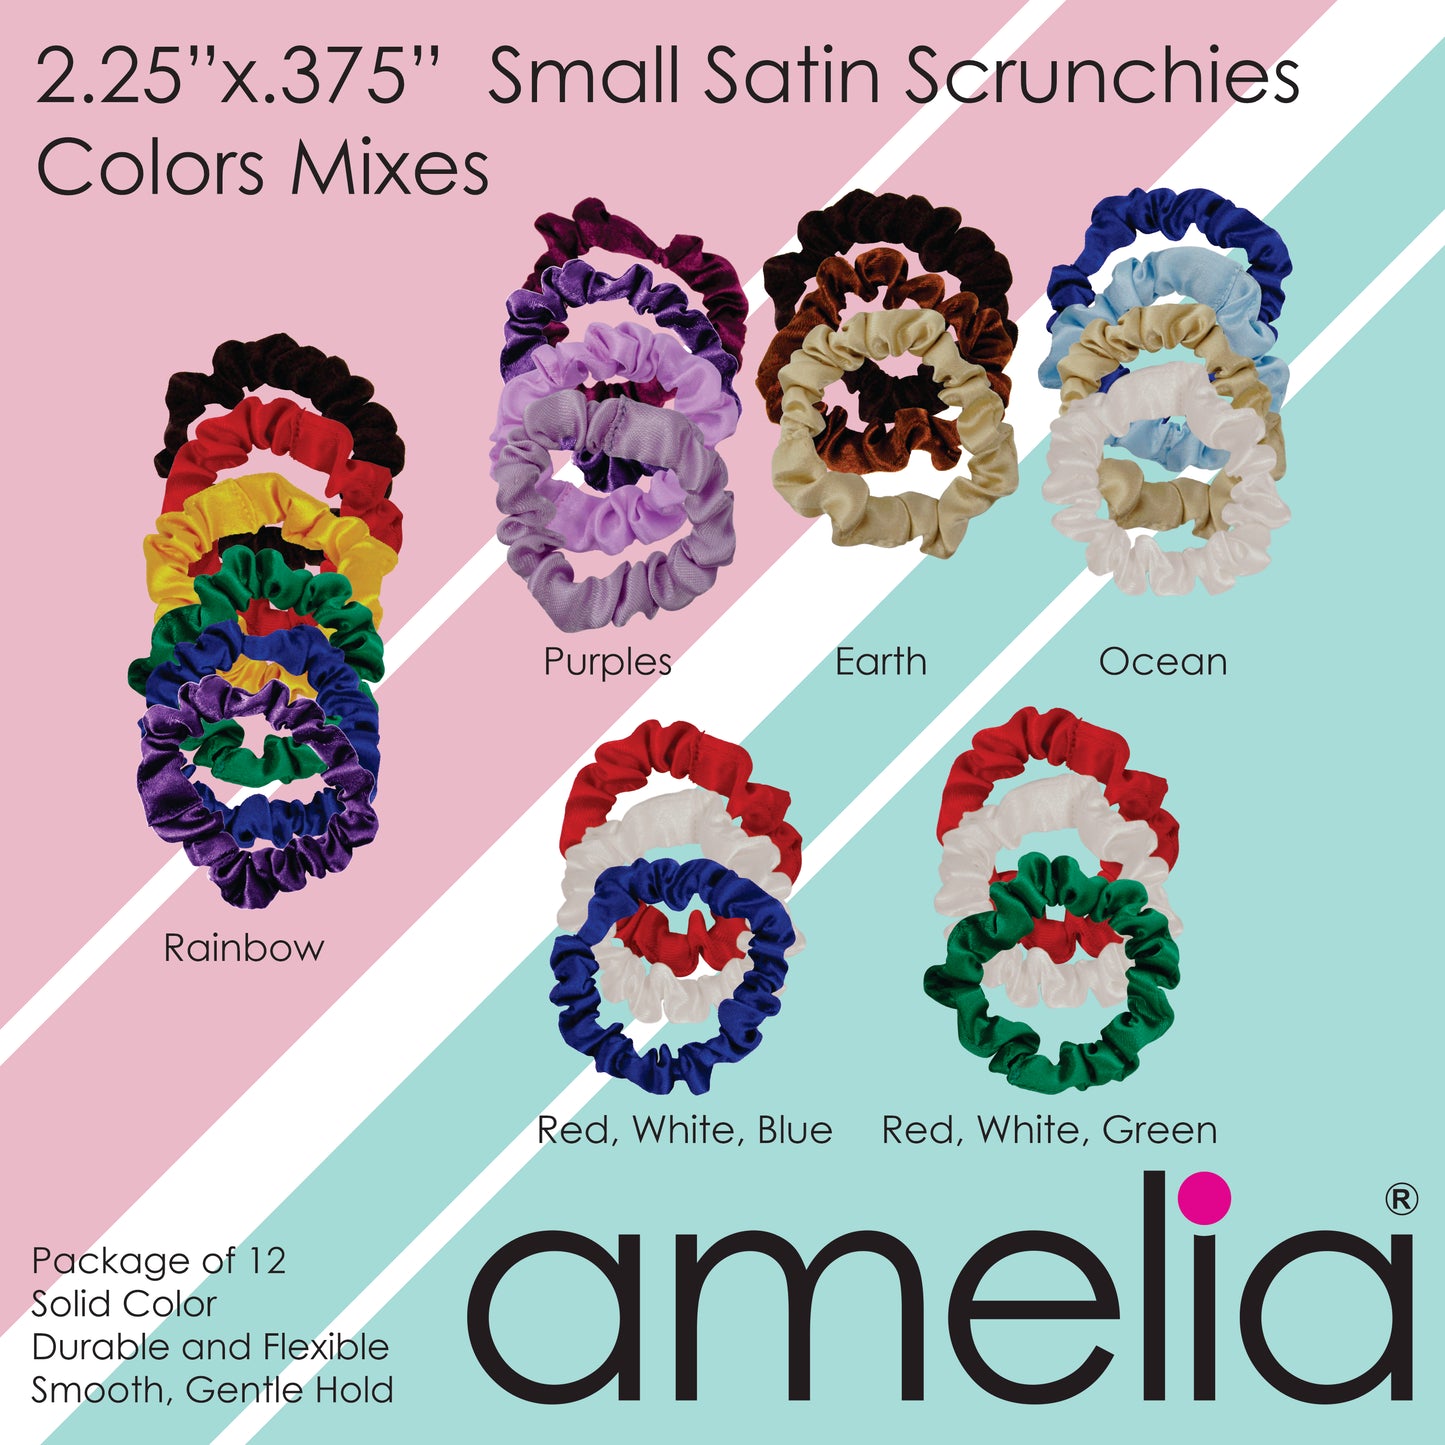 Amelia Beauty, Lime Satin Scrunchies, 2.25in Diameter, Gentle on Hair, Strong Hold, No Snag, No Dents or Creases. 12 Pack